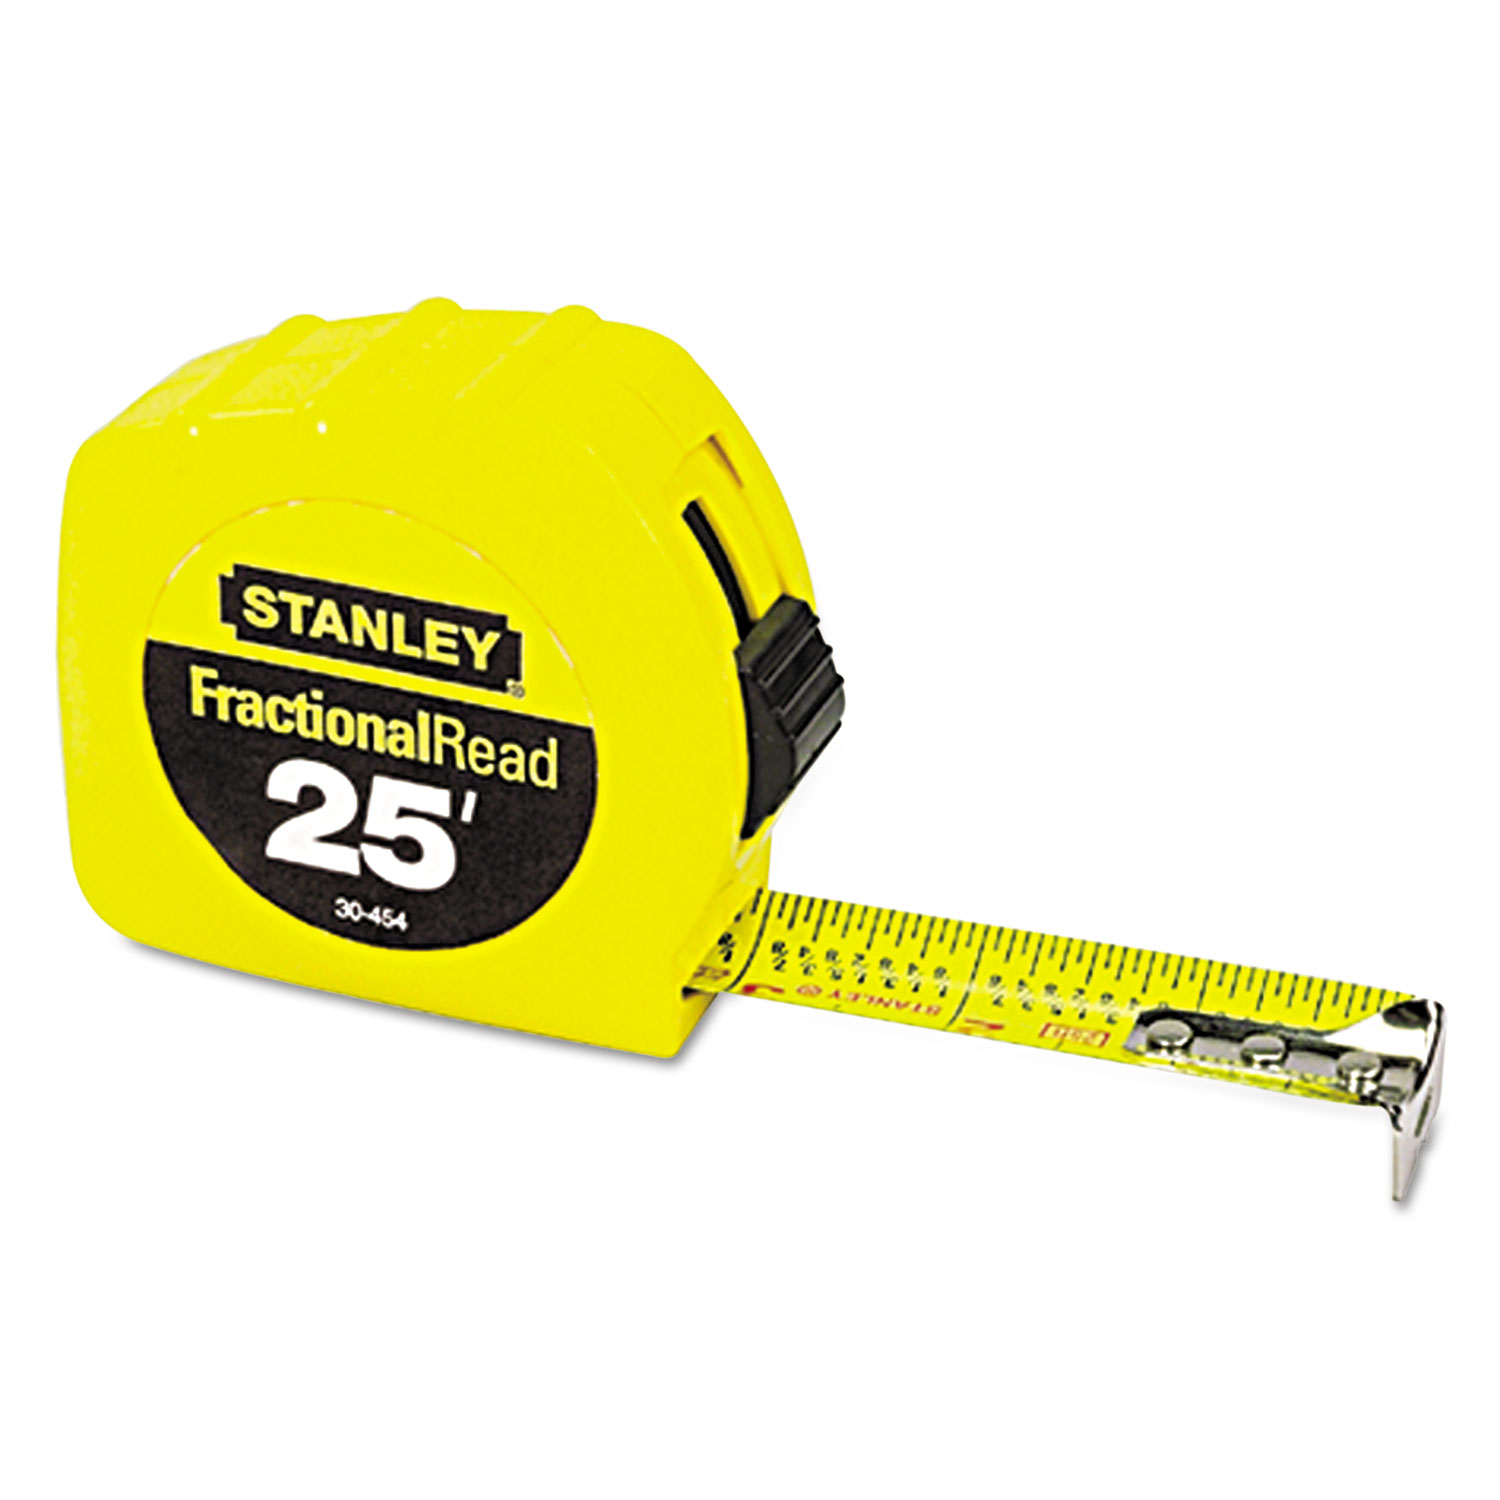  Stanley Tools 30-454 Tape Rule, 1 x 25ft, Steel Blade, Plastic Case, Yellow (BOS30454) 